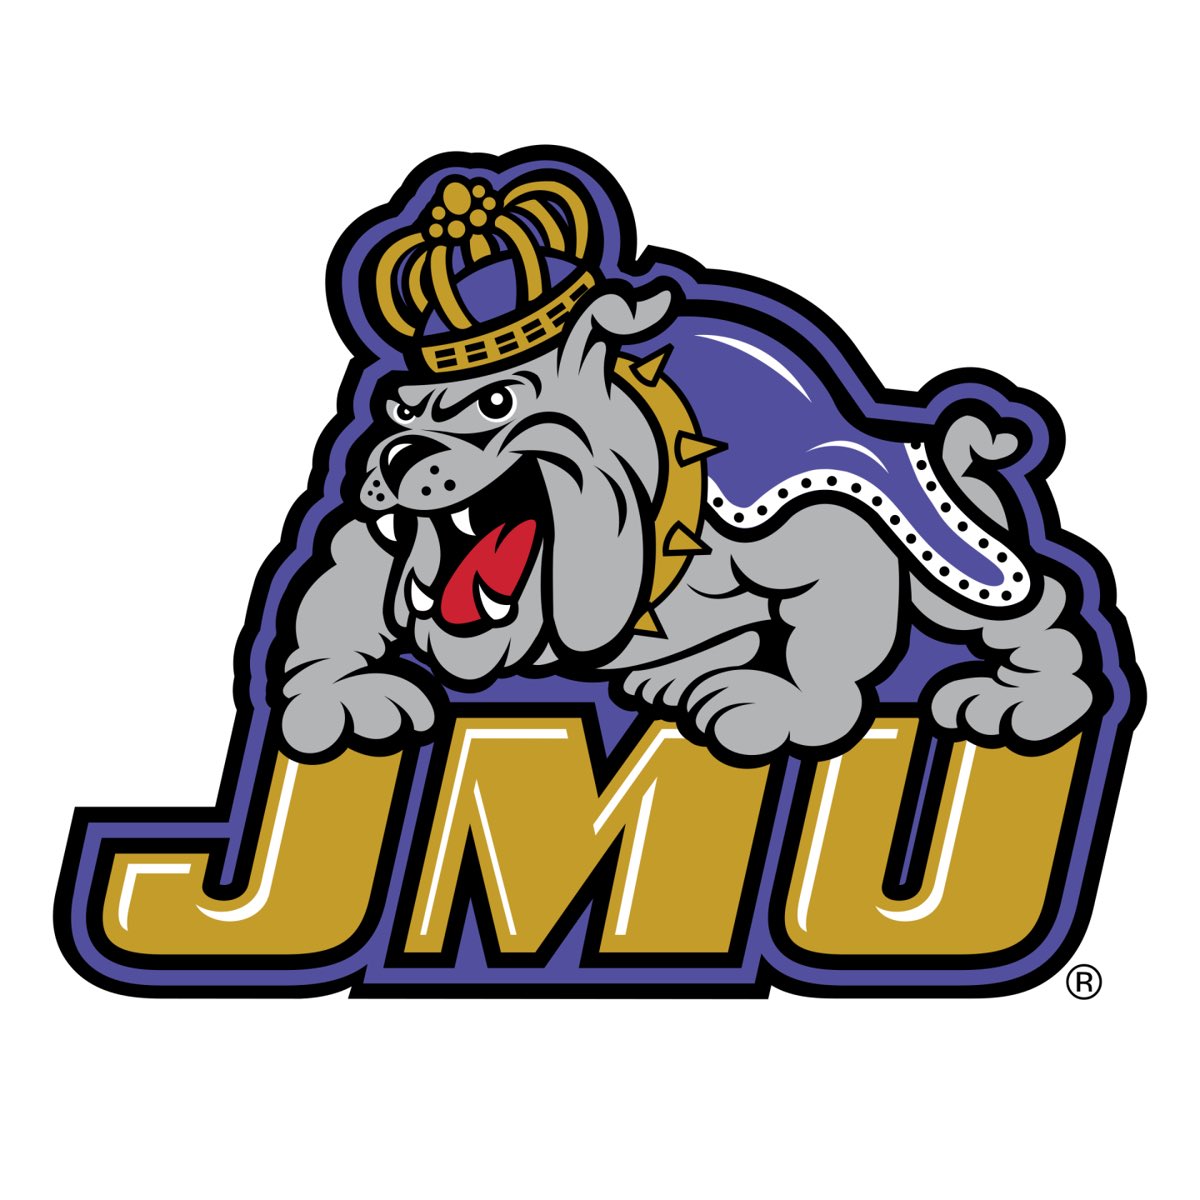 Blessed to say I have received my 3rd D1 offer to James Madison University!! @EddieWhitley37 @Coach_DKennedy @CoachHolter0623